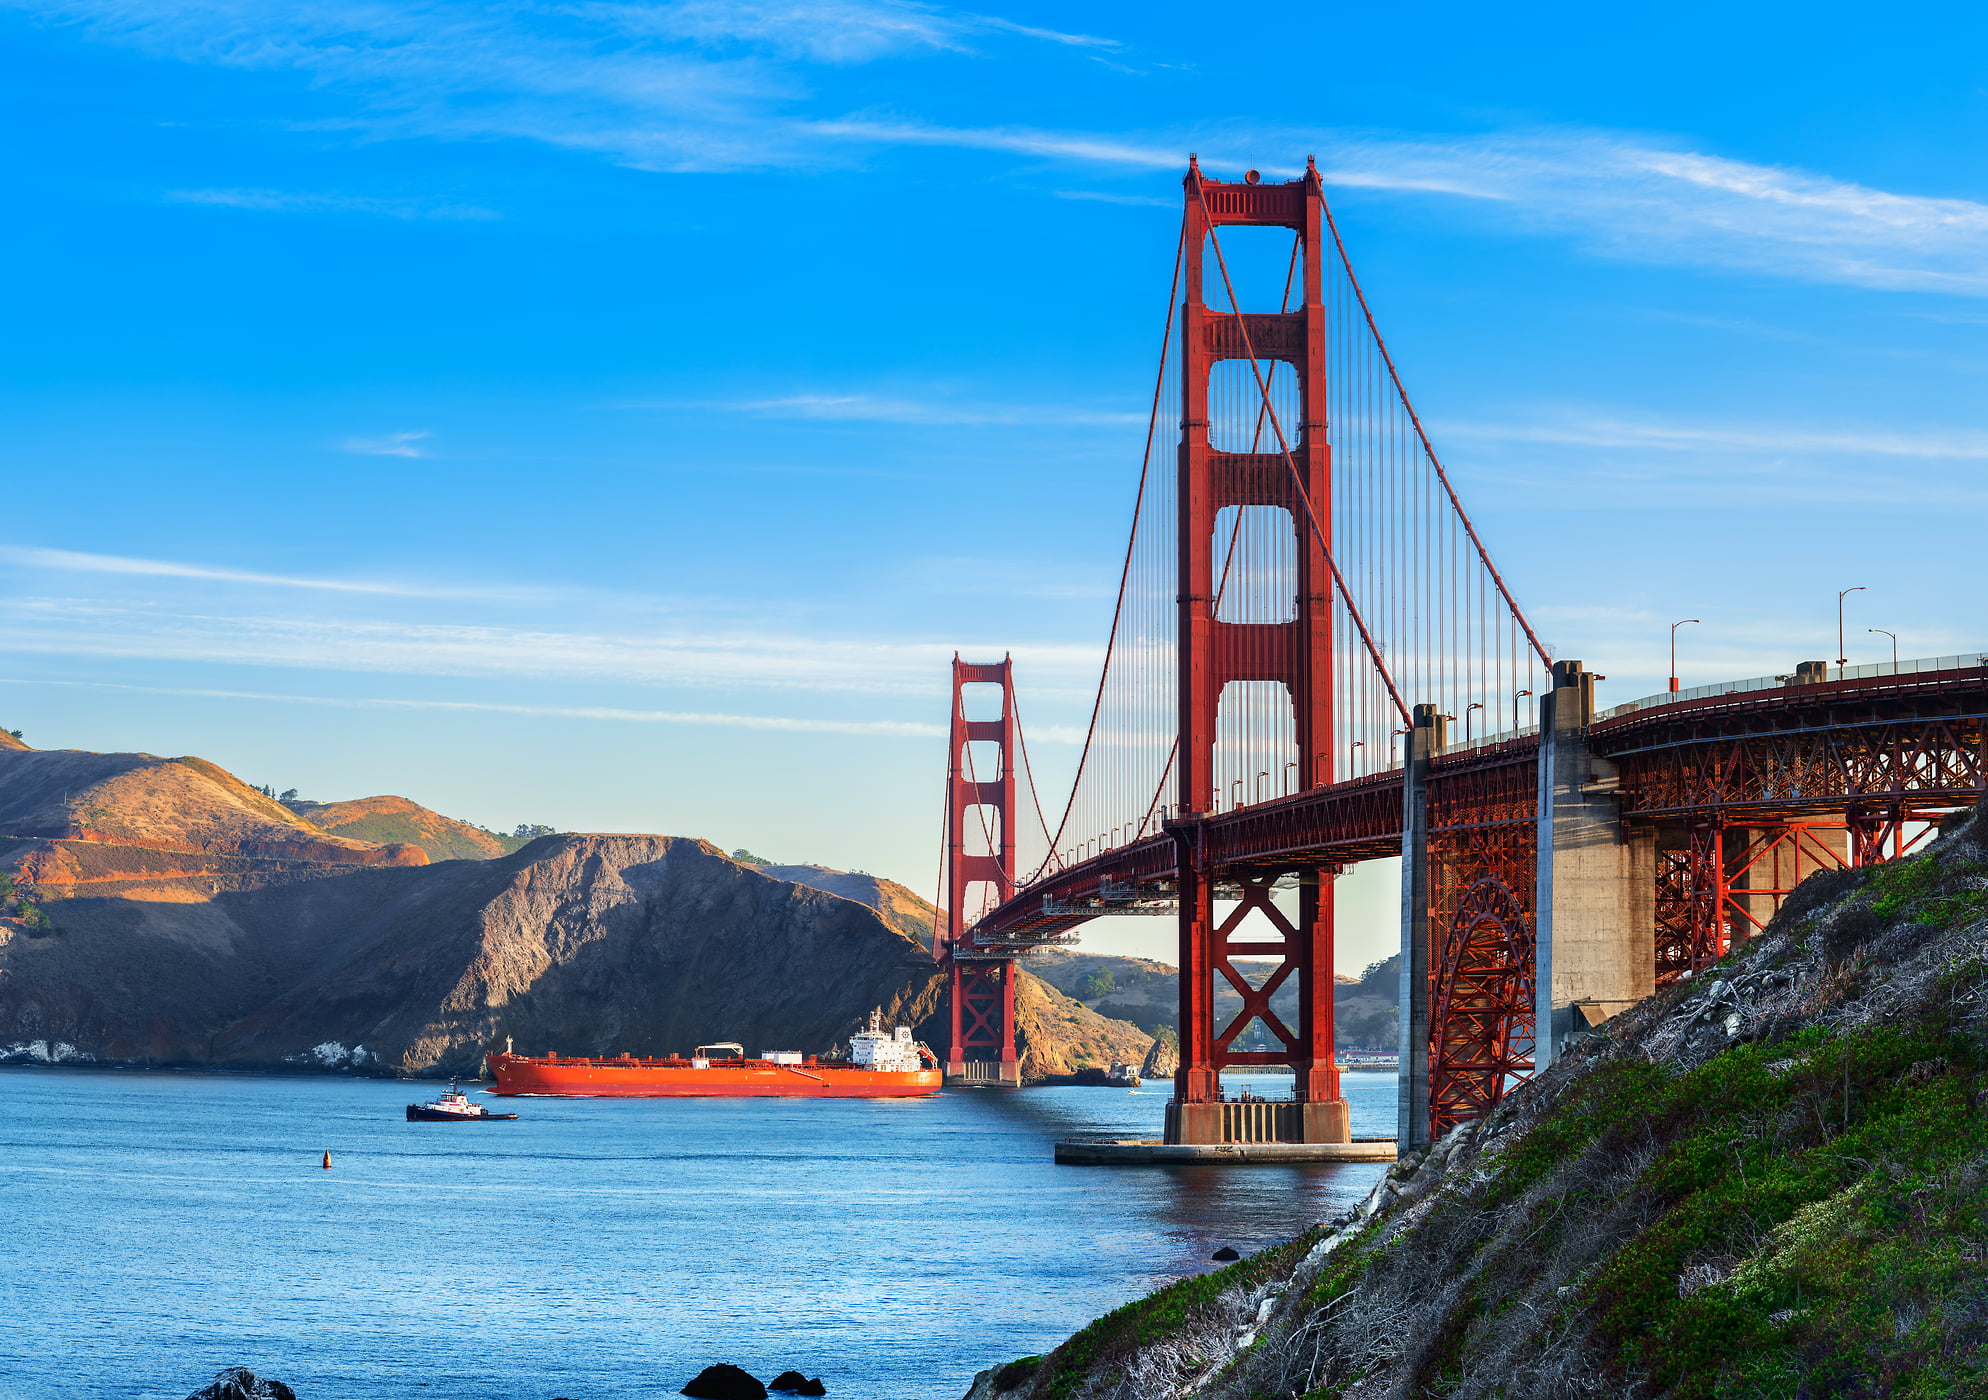 588 megapixels! A very high resolution, large-format VAST photo print of the Golden Gate Bridge with a blue sky in the background and the San Francisco Bay in the foreground; photograph created by Jim Tarpo in Marshall's Beach, San Francisco, California.